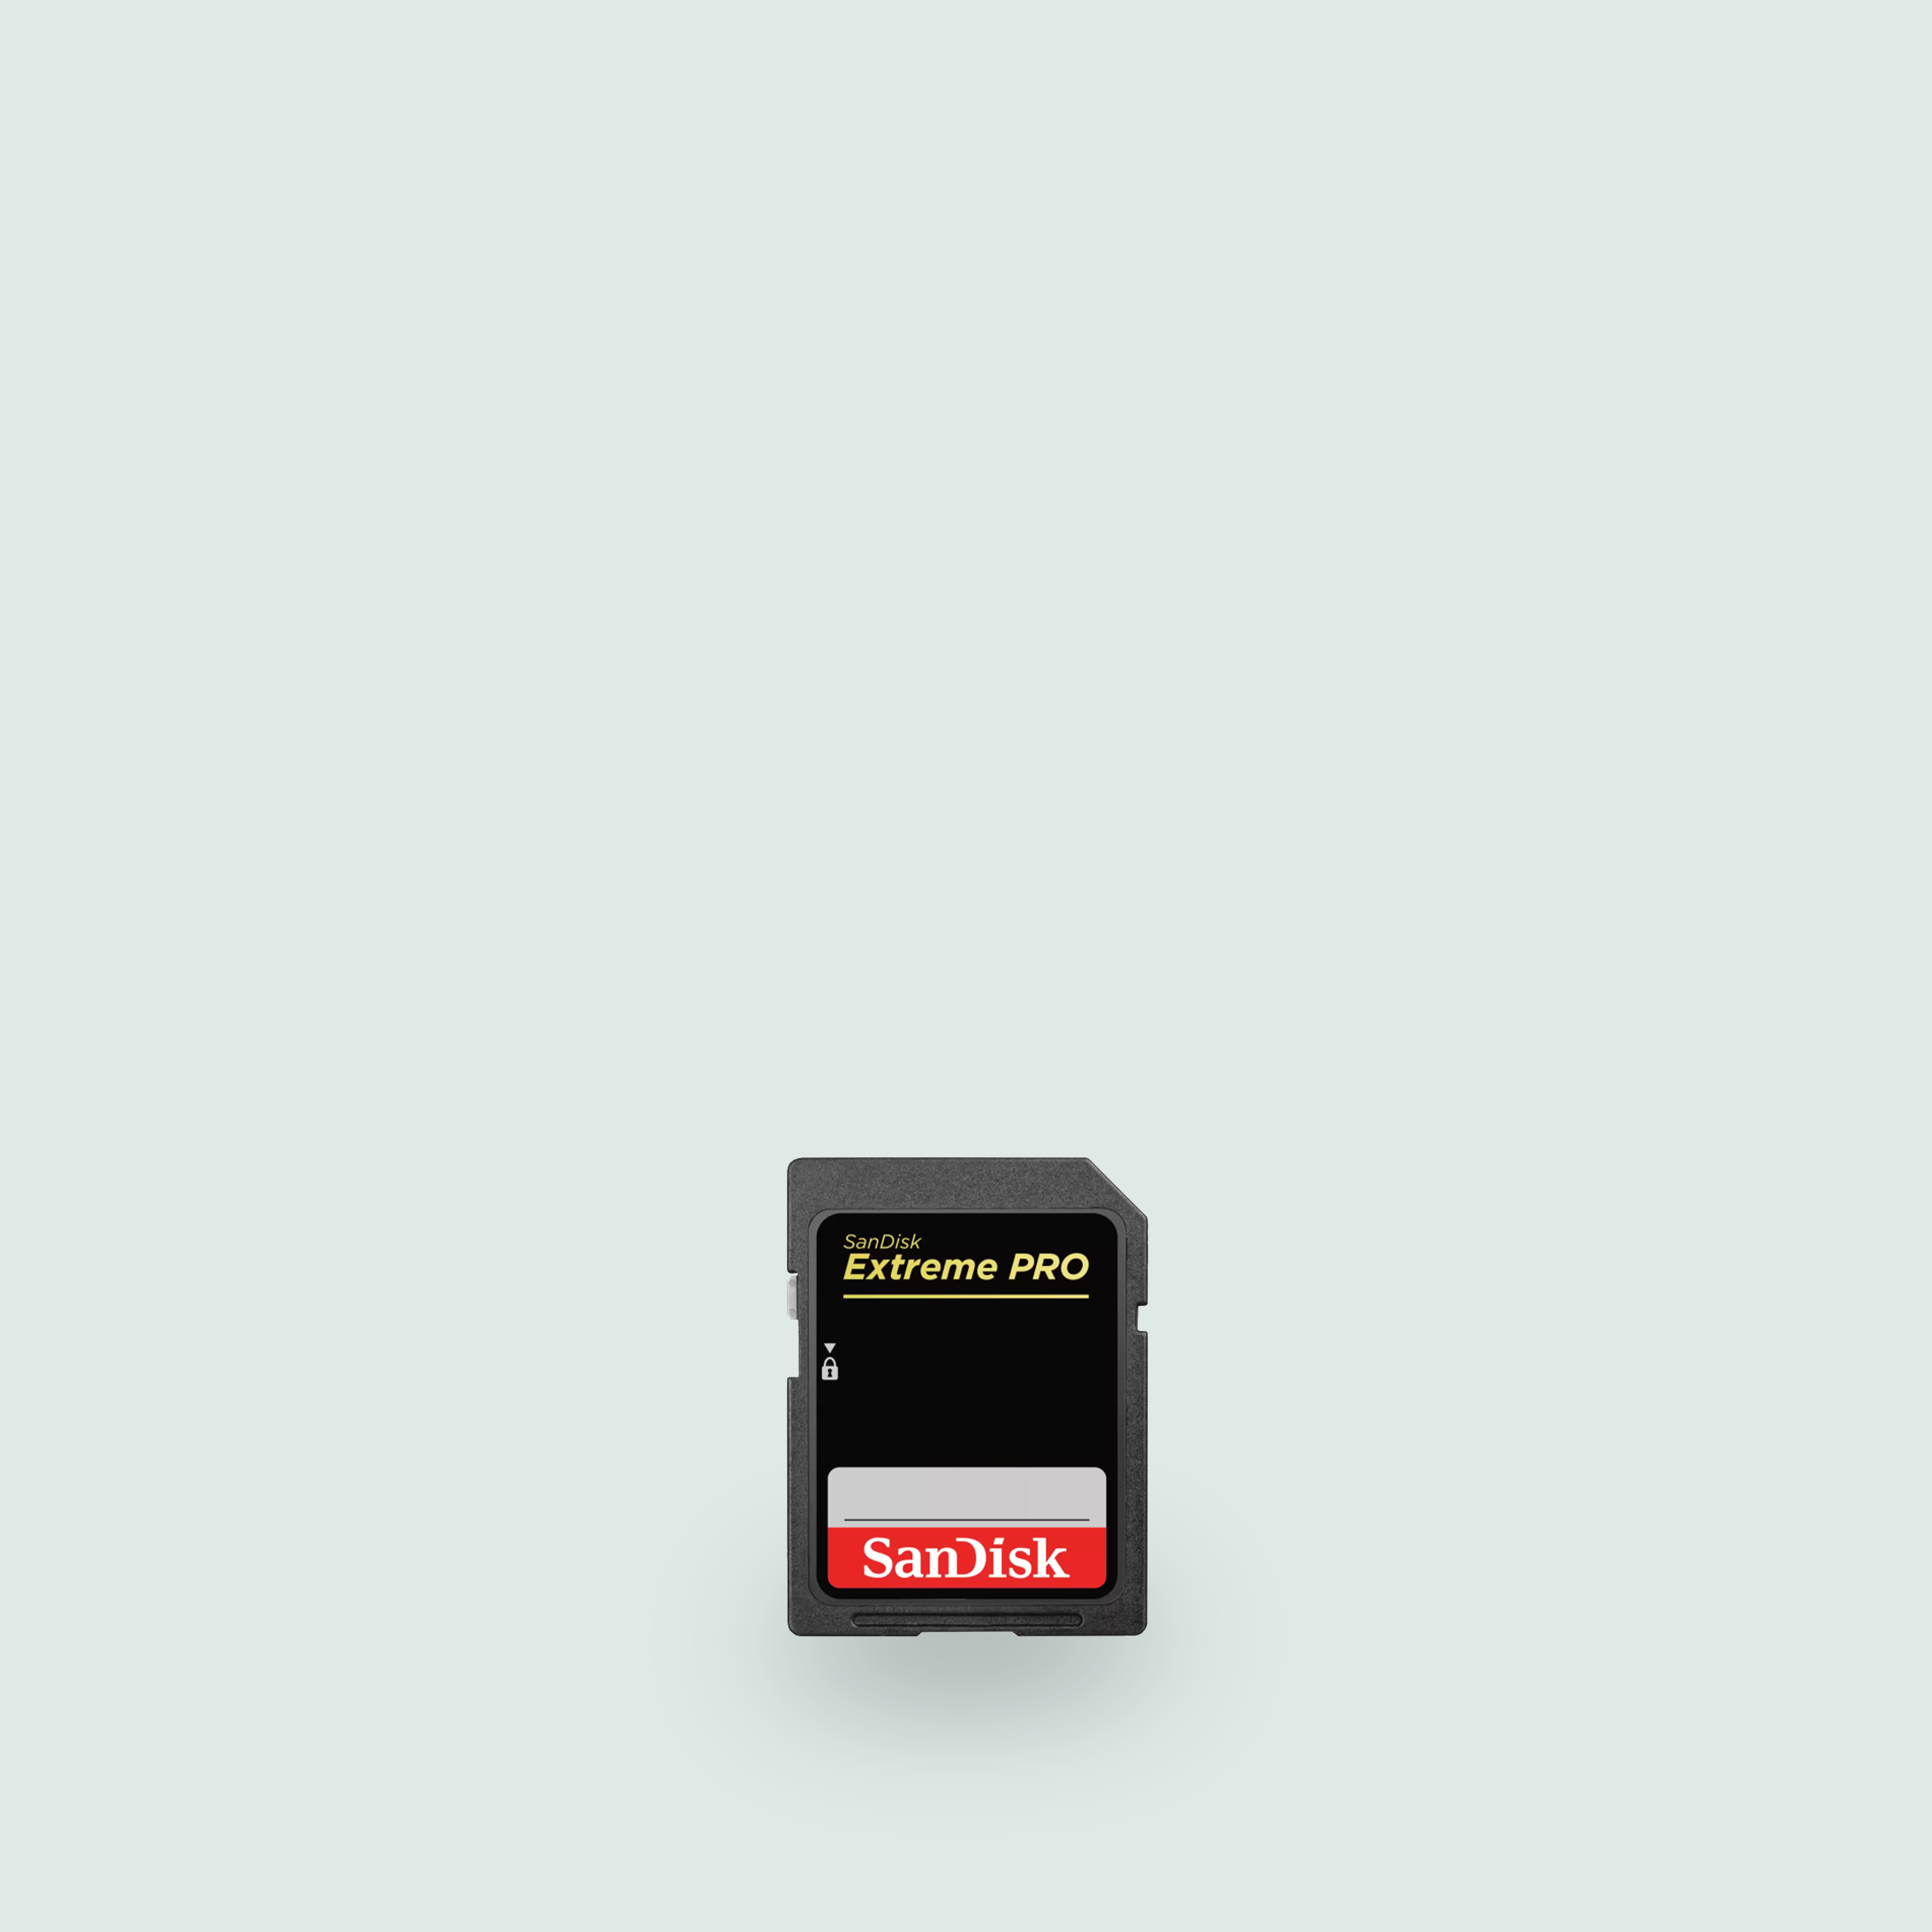 SanDisk Extreme PRO SDXC 64G UHS-II 260MB/s R 300MB/s W